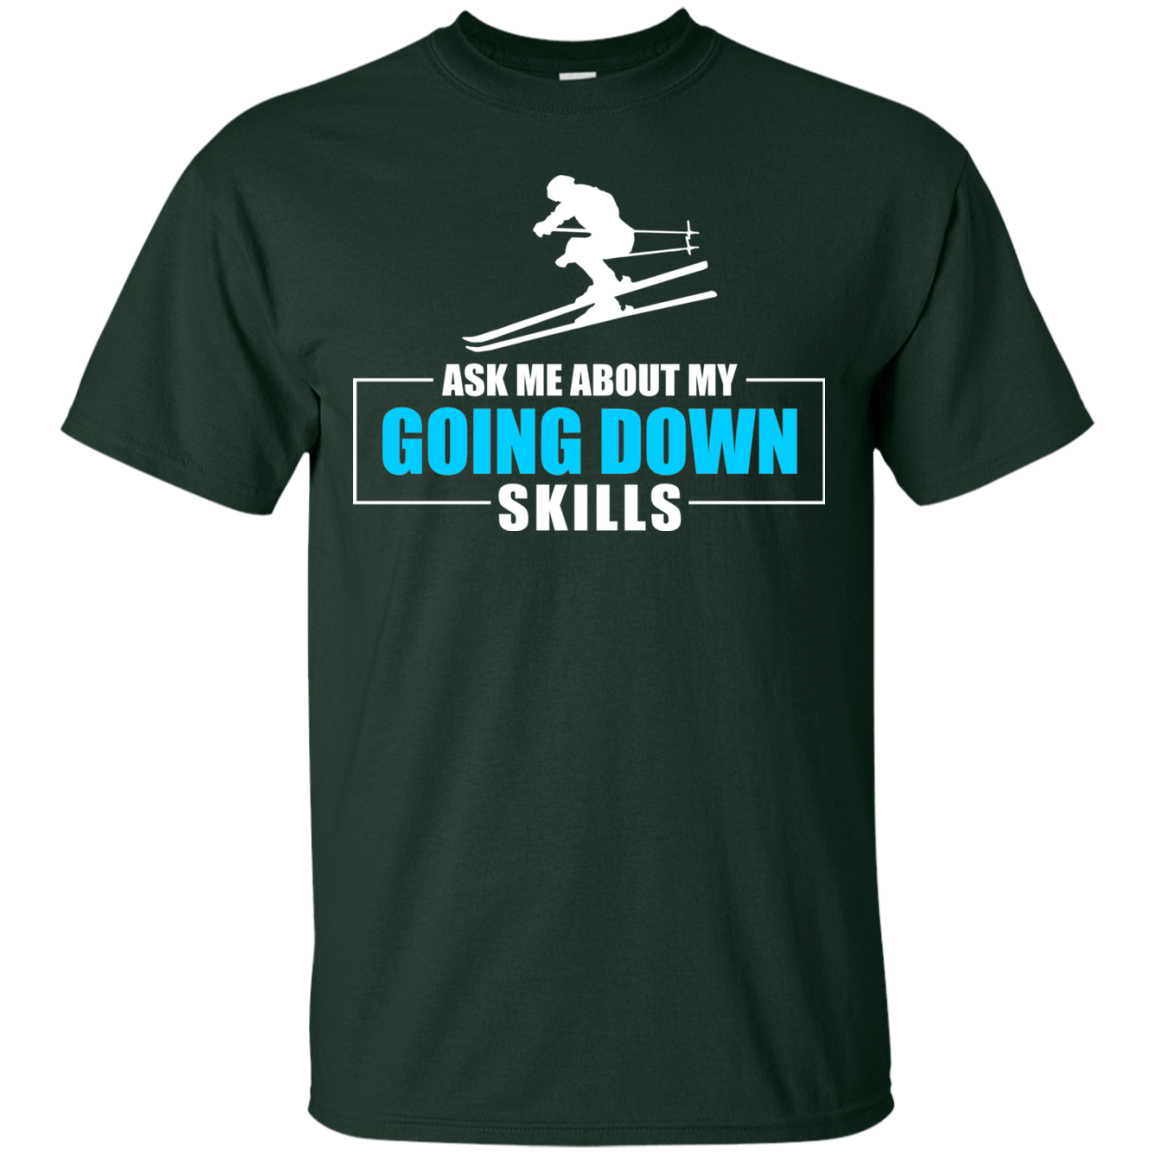 Ask Me About My Going Down Skills - Ski Men's Tees and V-Neck - Powderaddicts